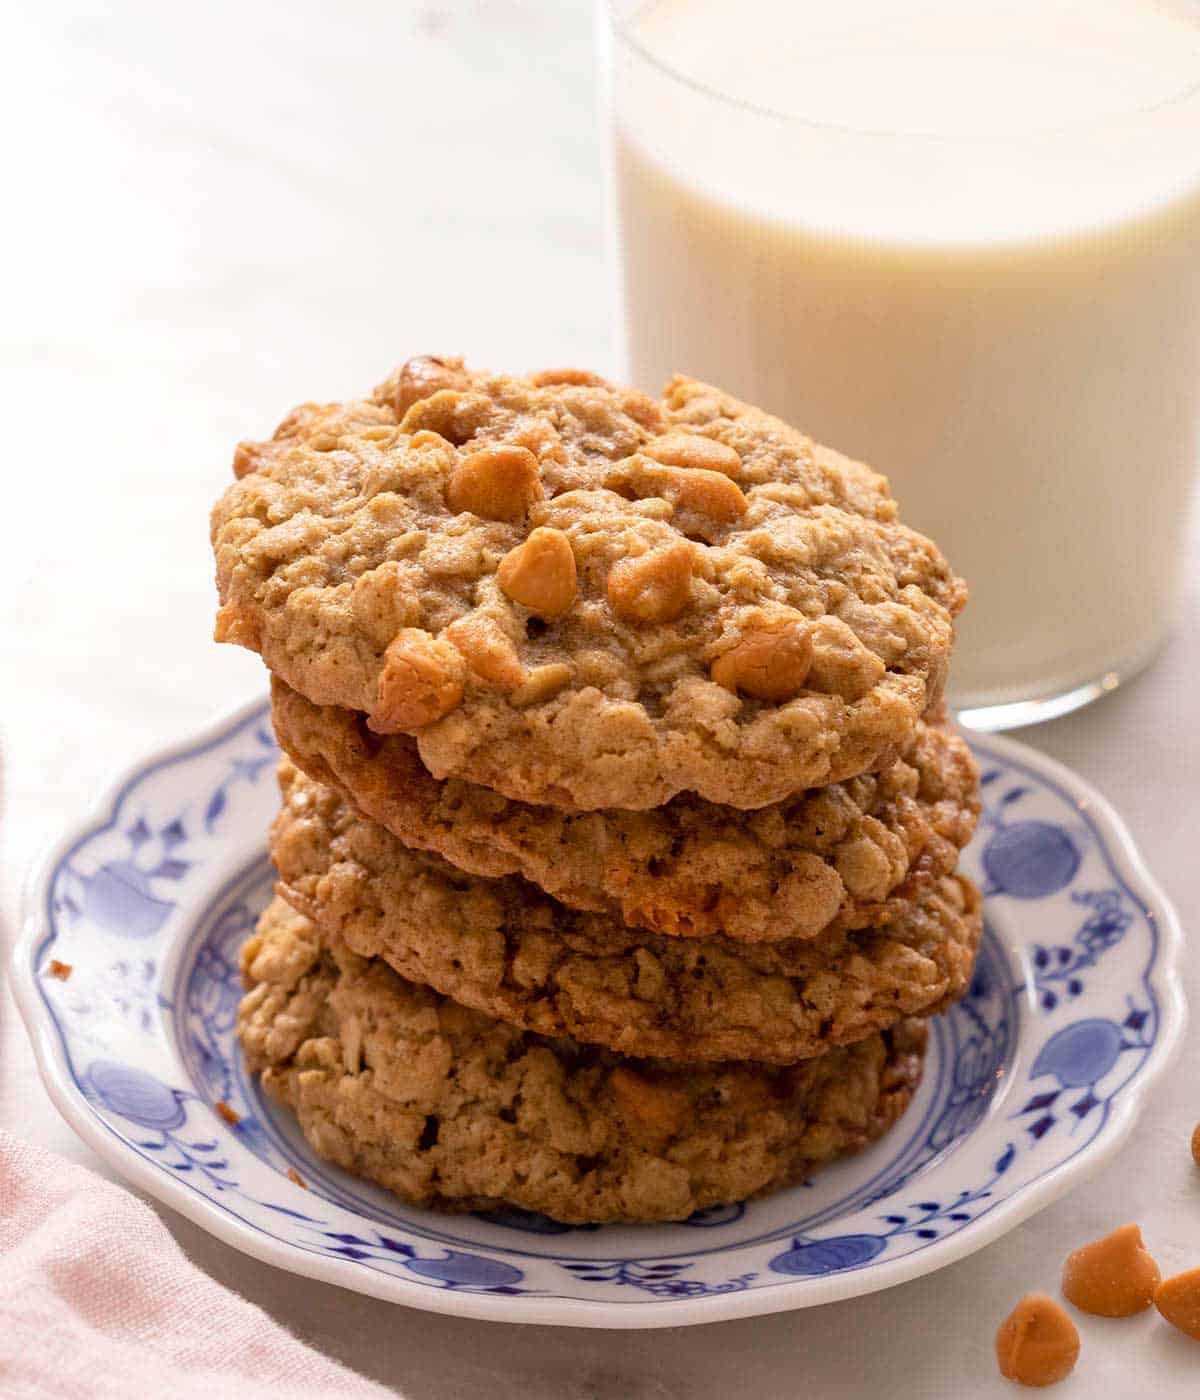 Oatmeal scotchies stacked up on a plate with a glass of milk behind it